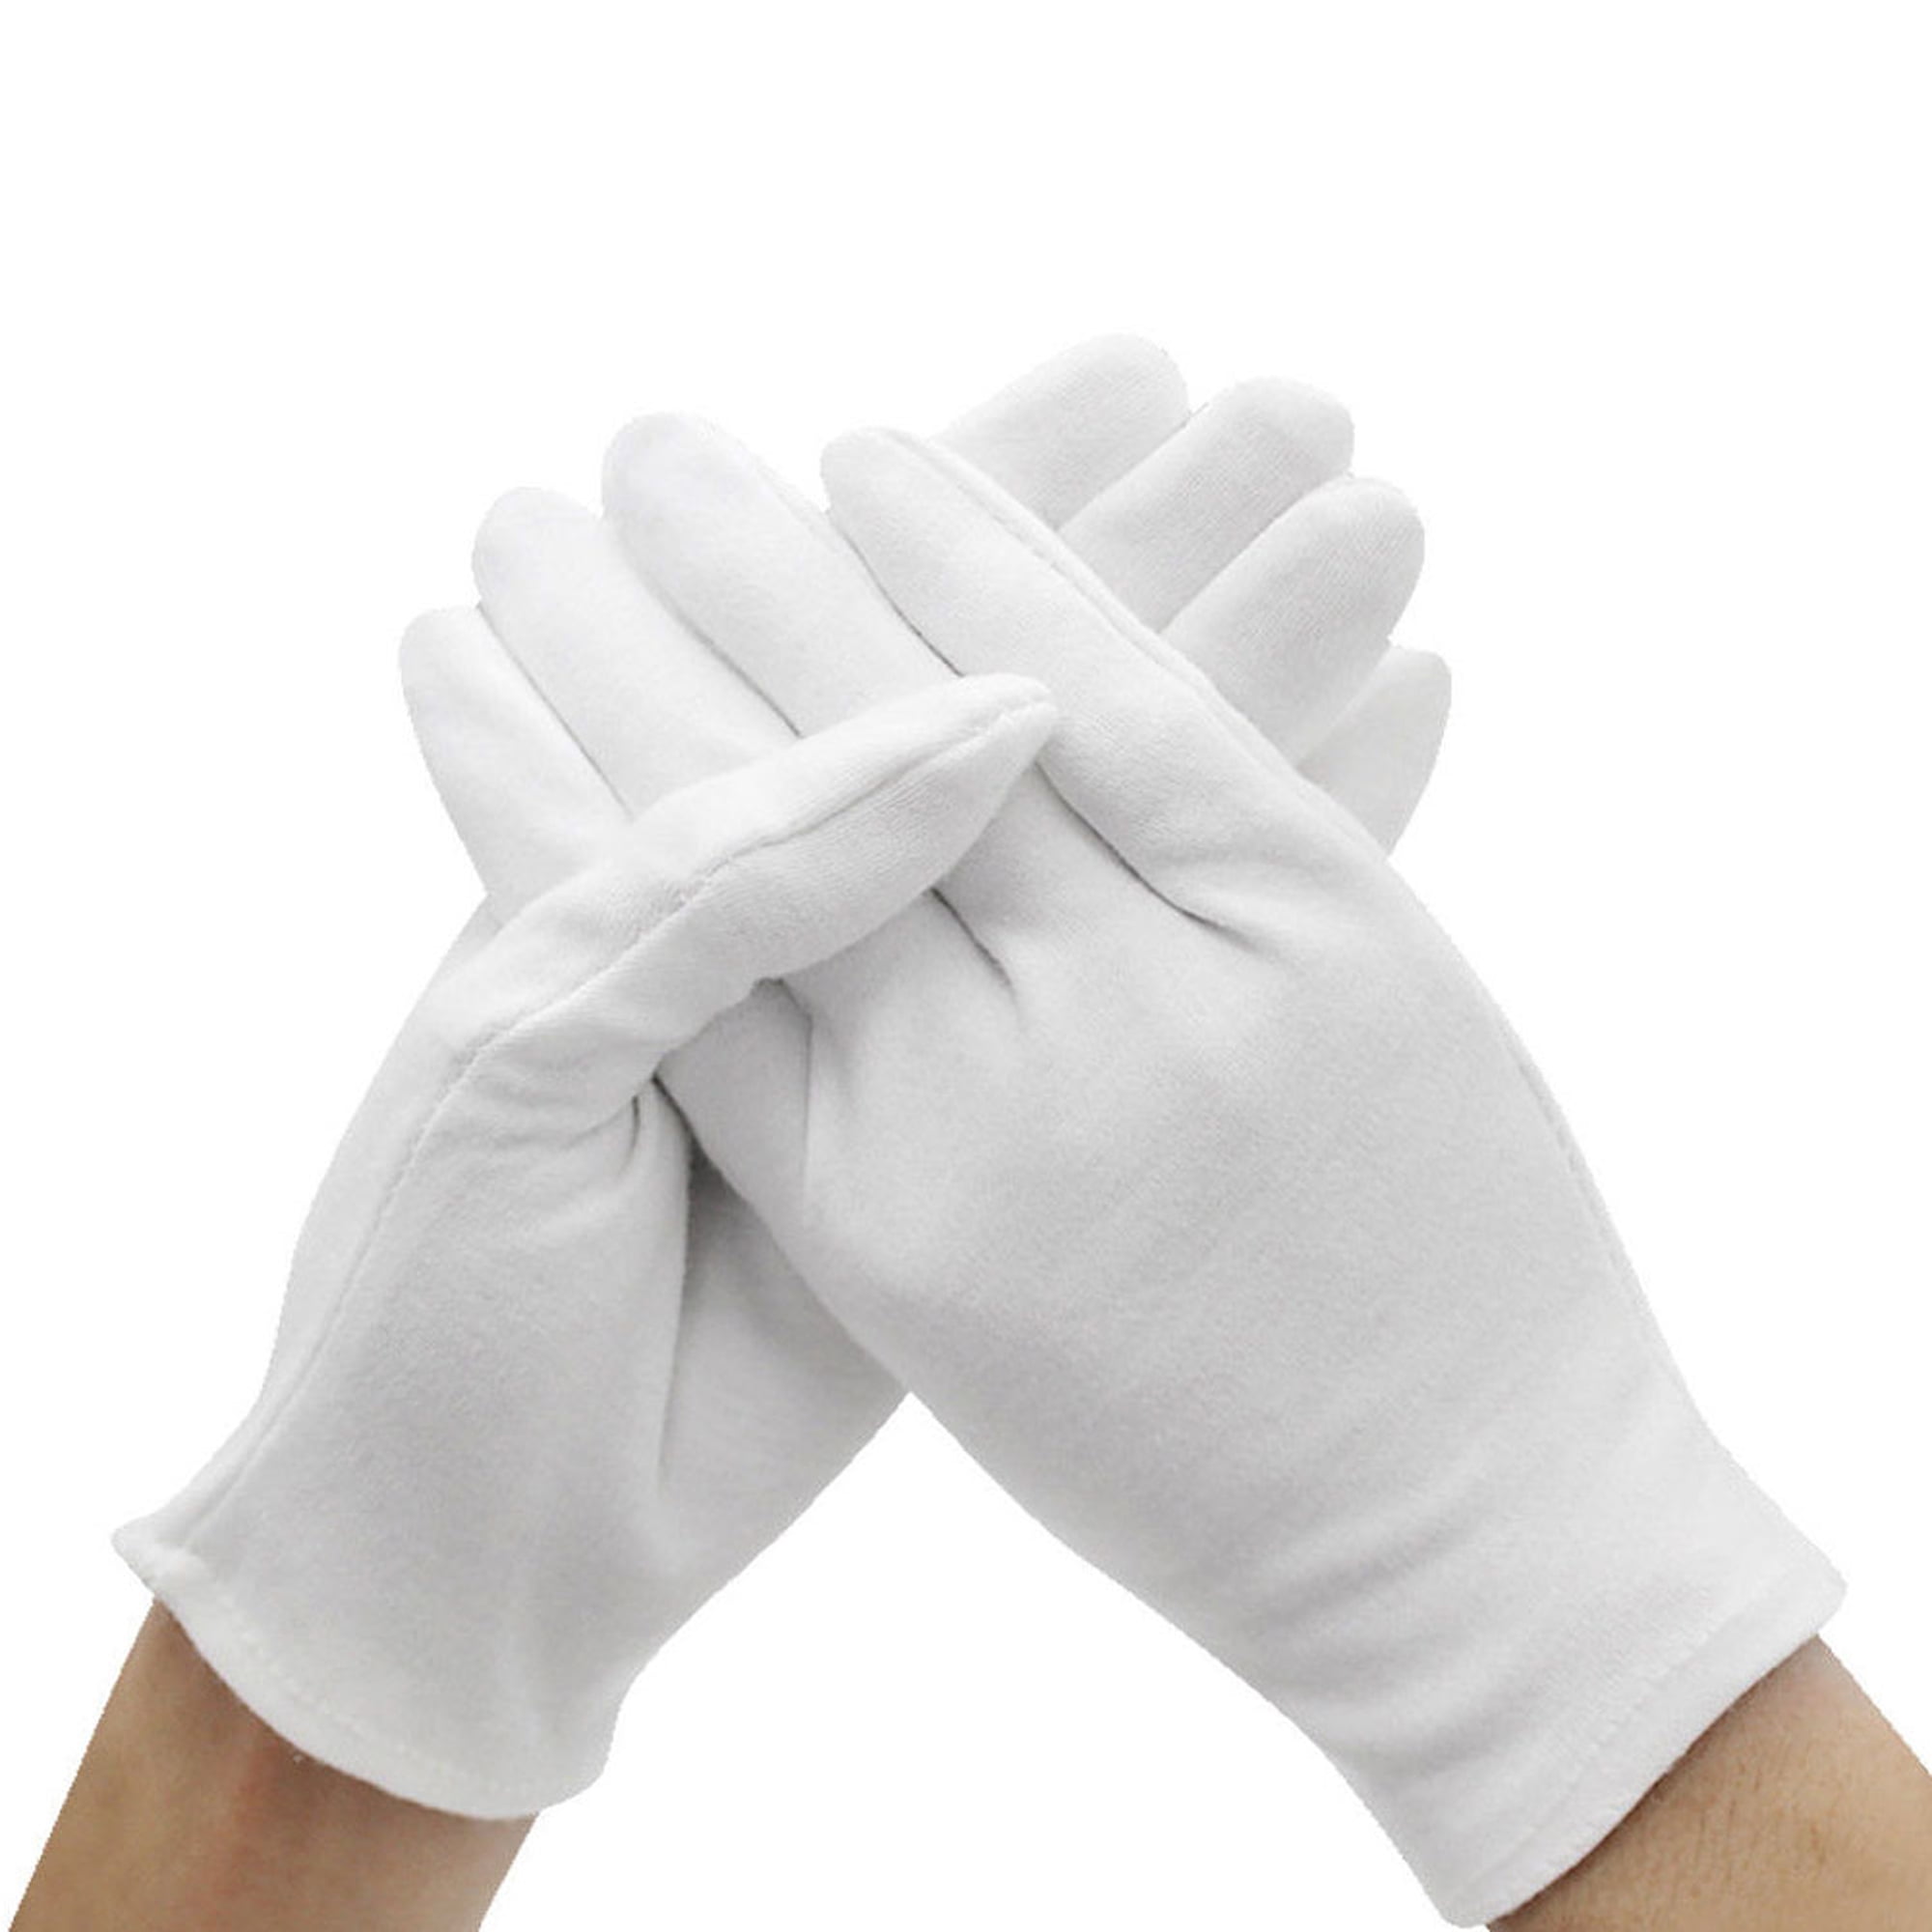 24 Pairs White Parade Gloves Non Slip Gripper Dot Gloves Thin Cotton Gloves for Men Women Coin Inspection Gloves Formal Marching Uniform Gloves with Elastic Cuff Police Guard Dress Costume Gloves 